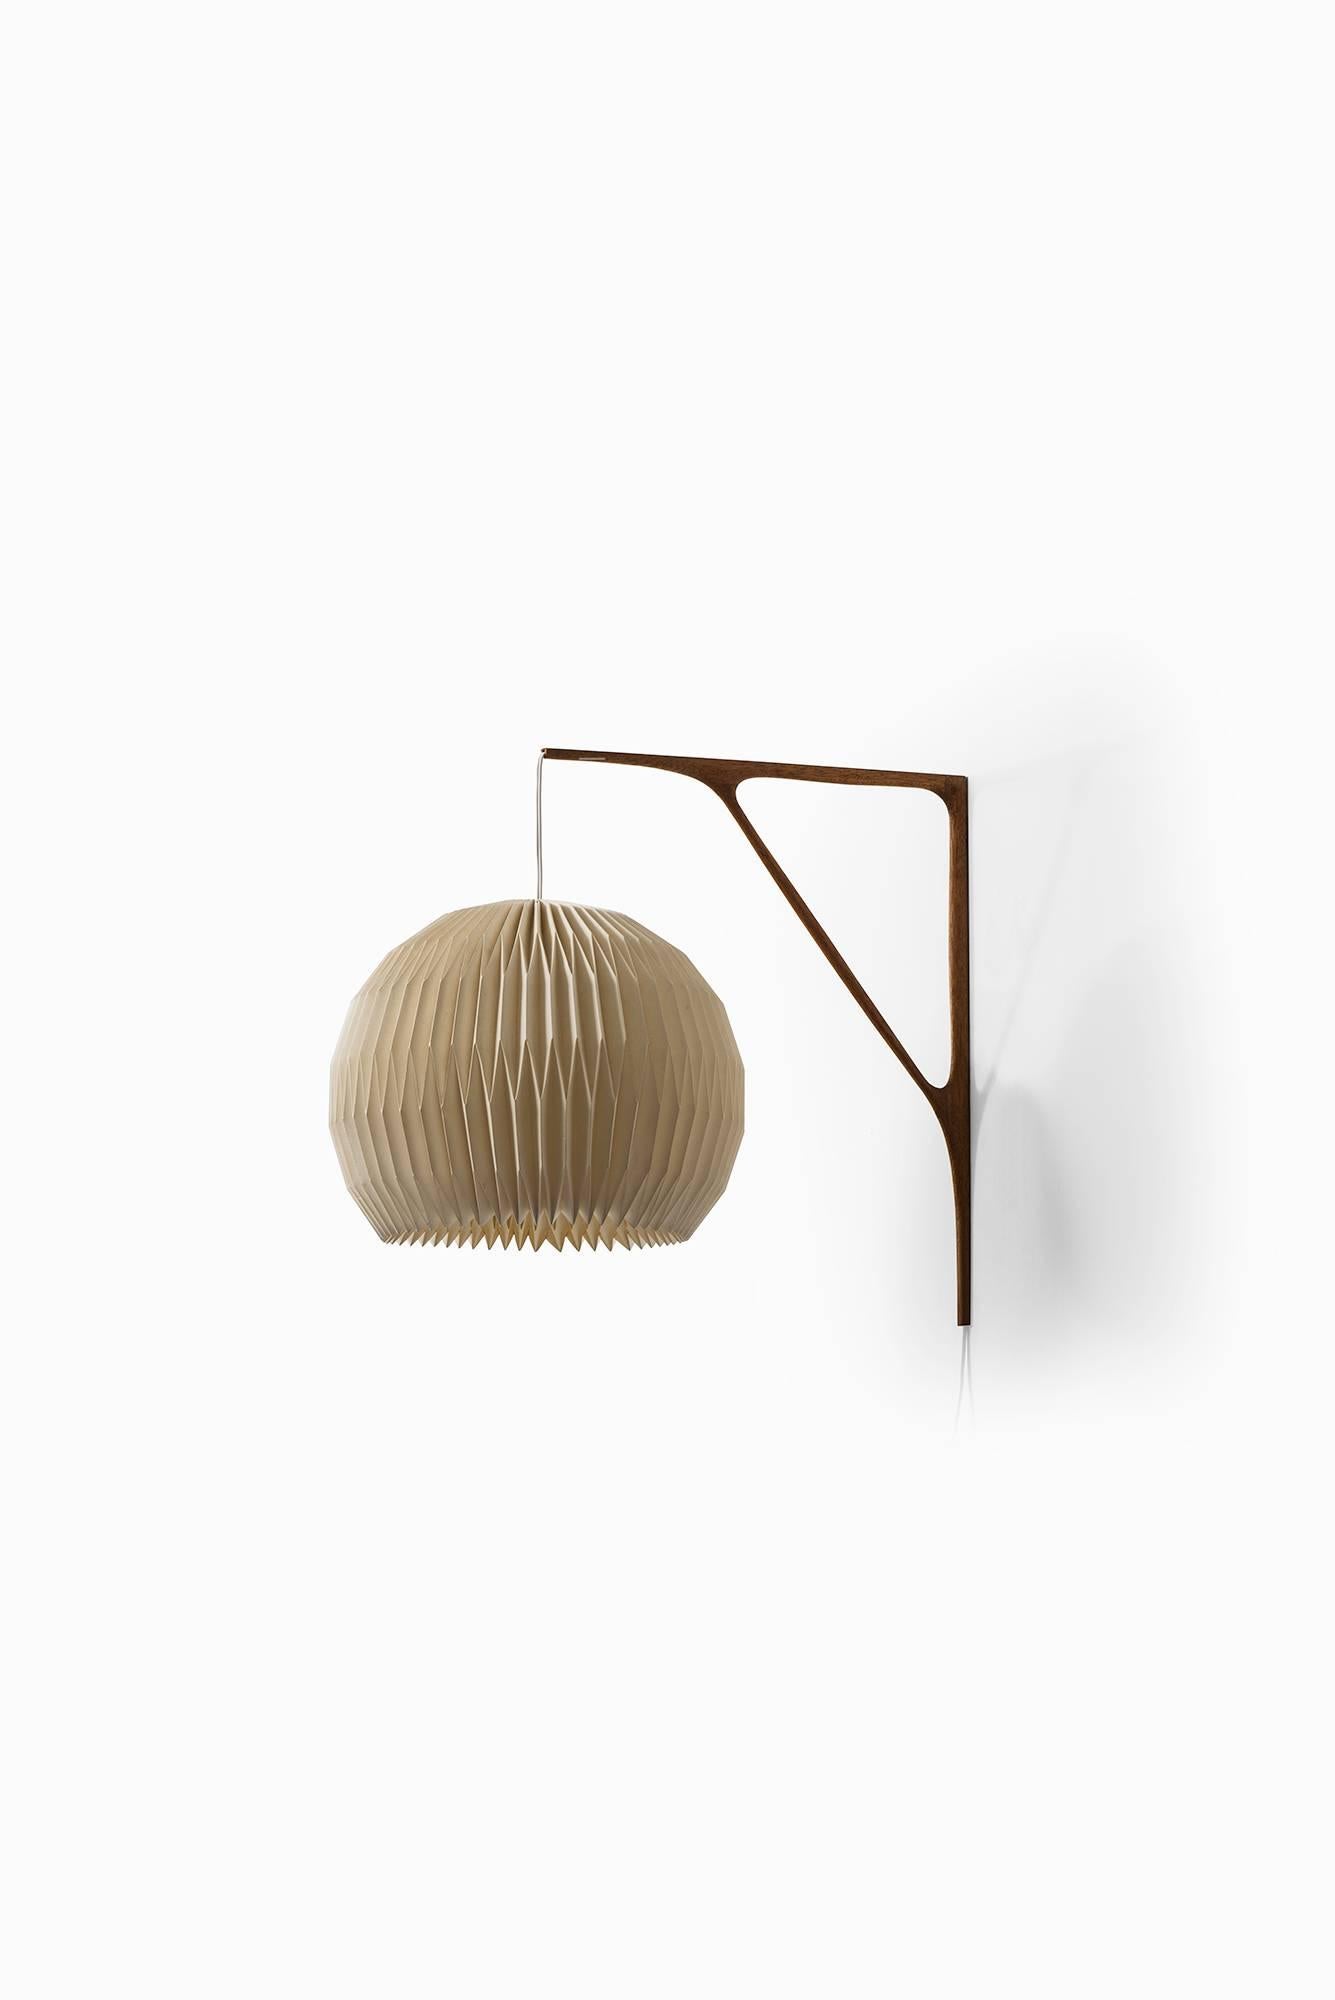 Danish Sculptural Wall Lamp in Teak with Lamp Shade by Le Klint